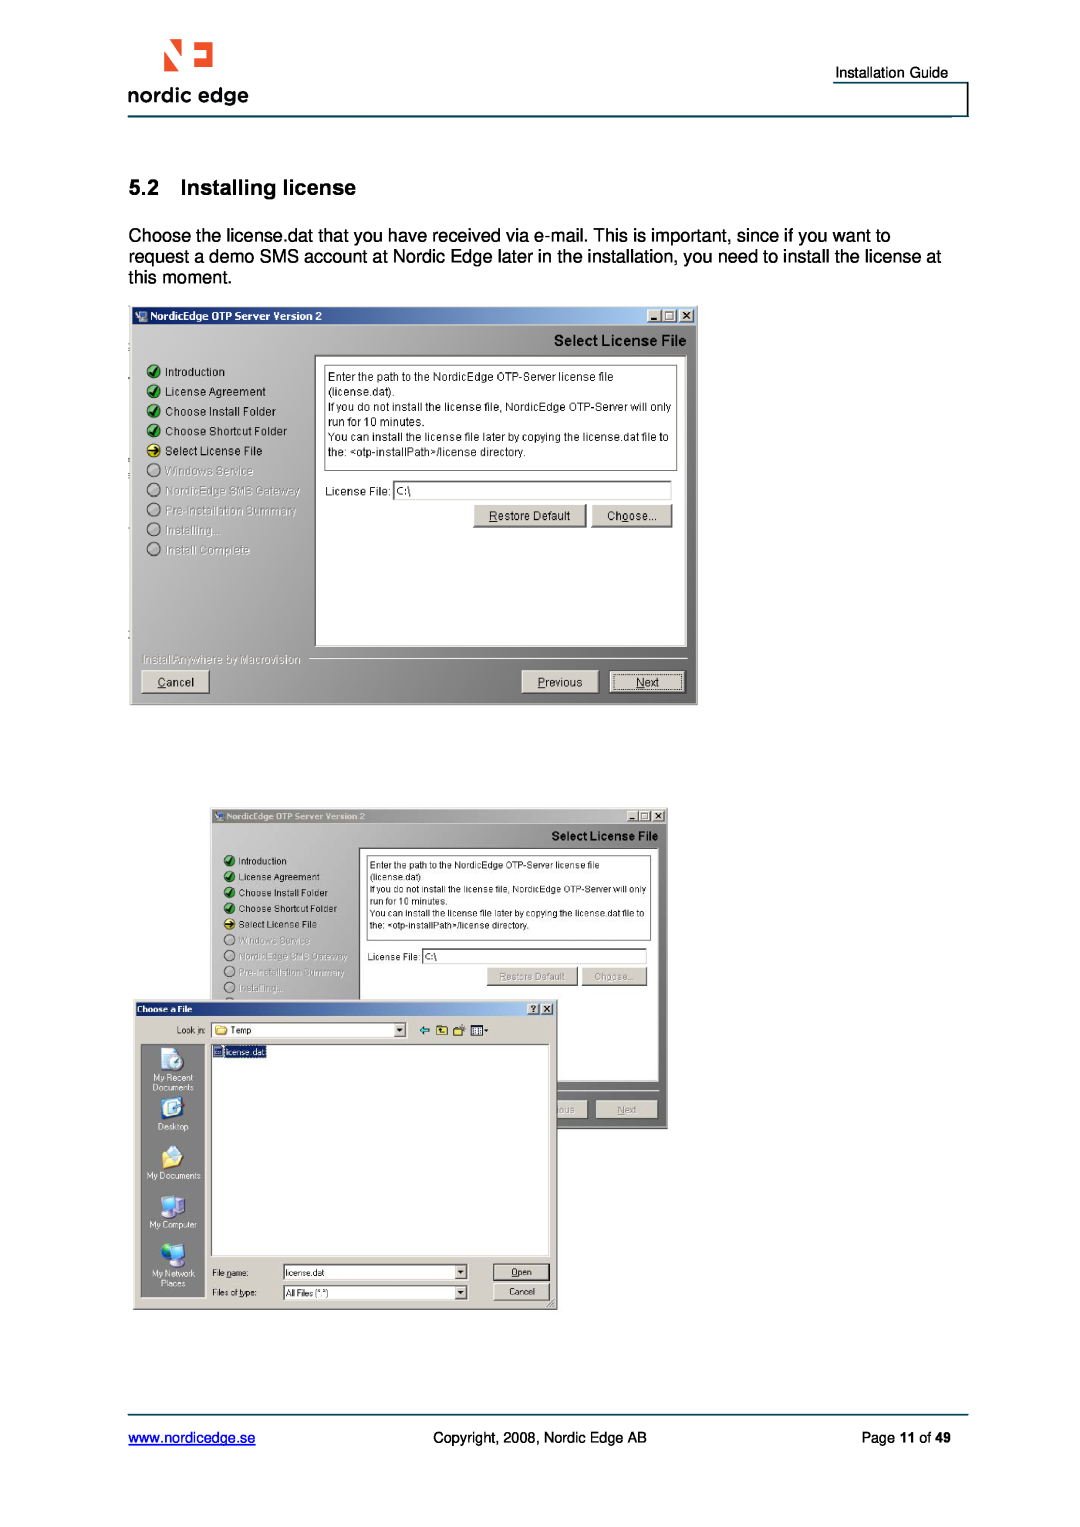 Cisco Systems ASA 5500 manual 5.2Installing license, Installation Guide, Copyright, 2008, Nordic Edge AB, Page 11 of 